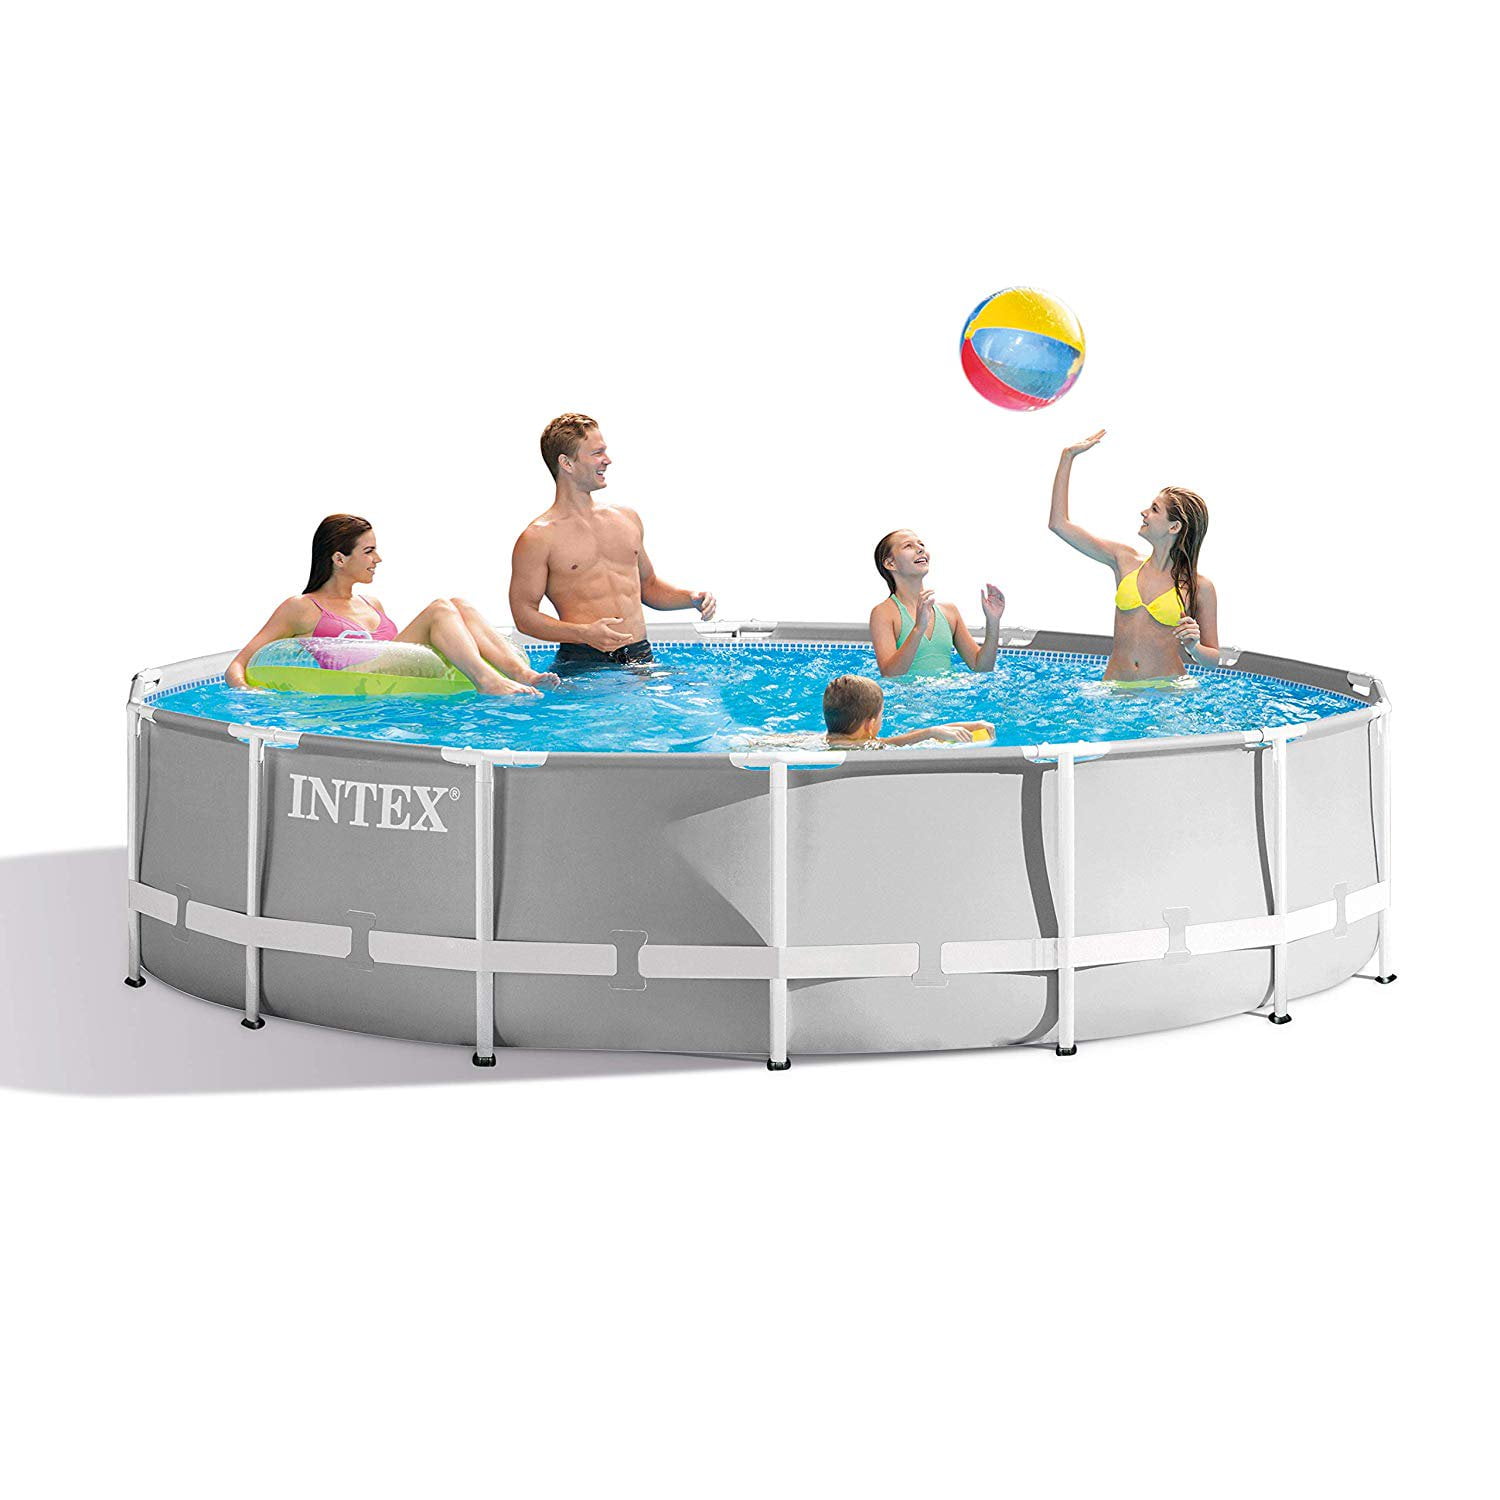 Intex 14 Foot x 42 Inch Prism Above Ground Swimming Pool Set with Filter - Walmart.com